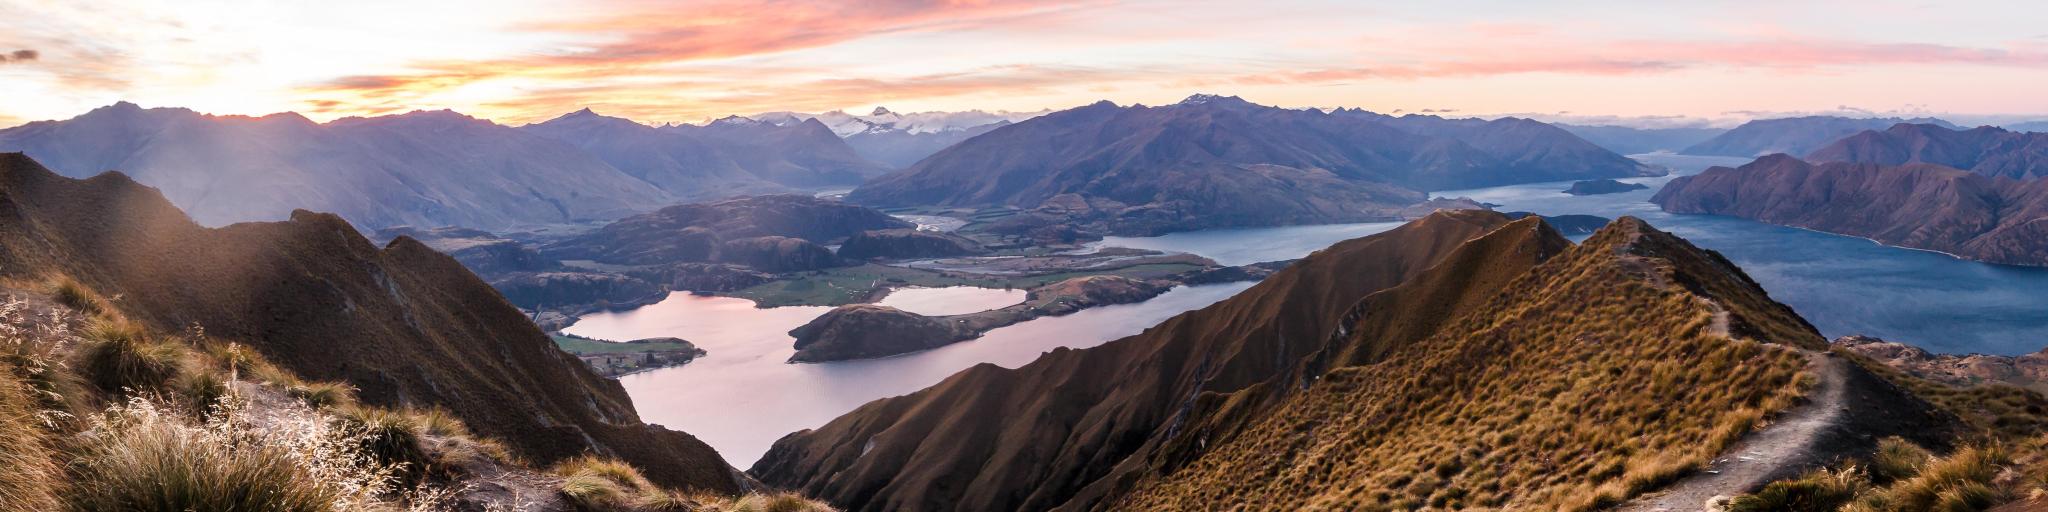 Queenstown, New Zealand with a panorama at sunset of Roys Peak between Wanaka and Queenstown with a lake and mount aspiring and cook of the new zealand alps on the background